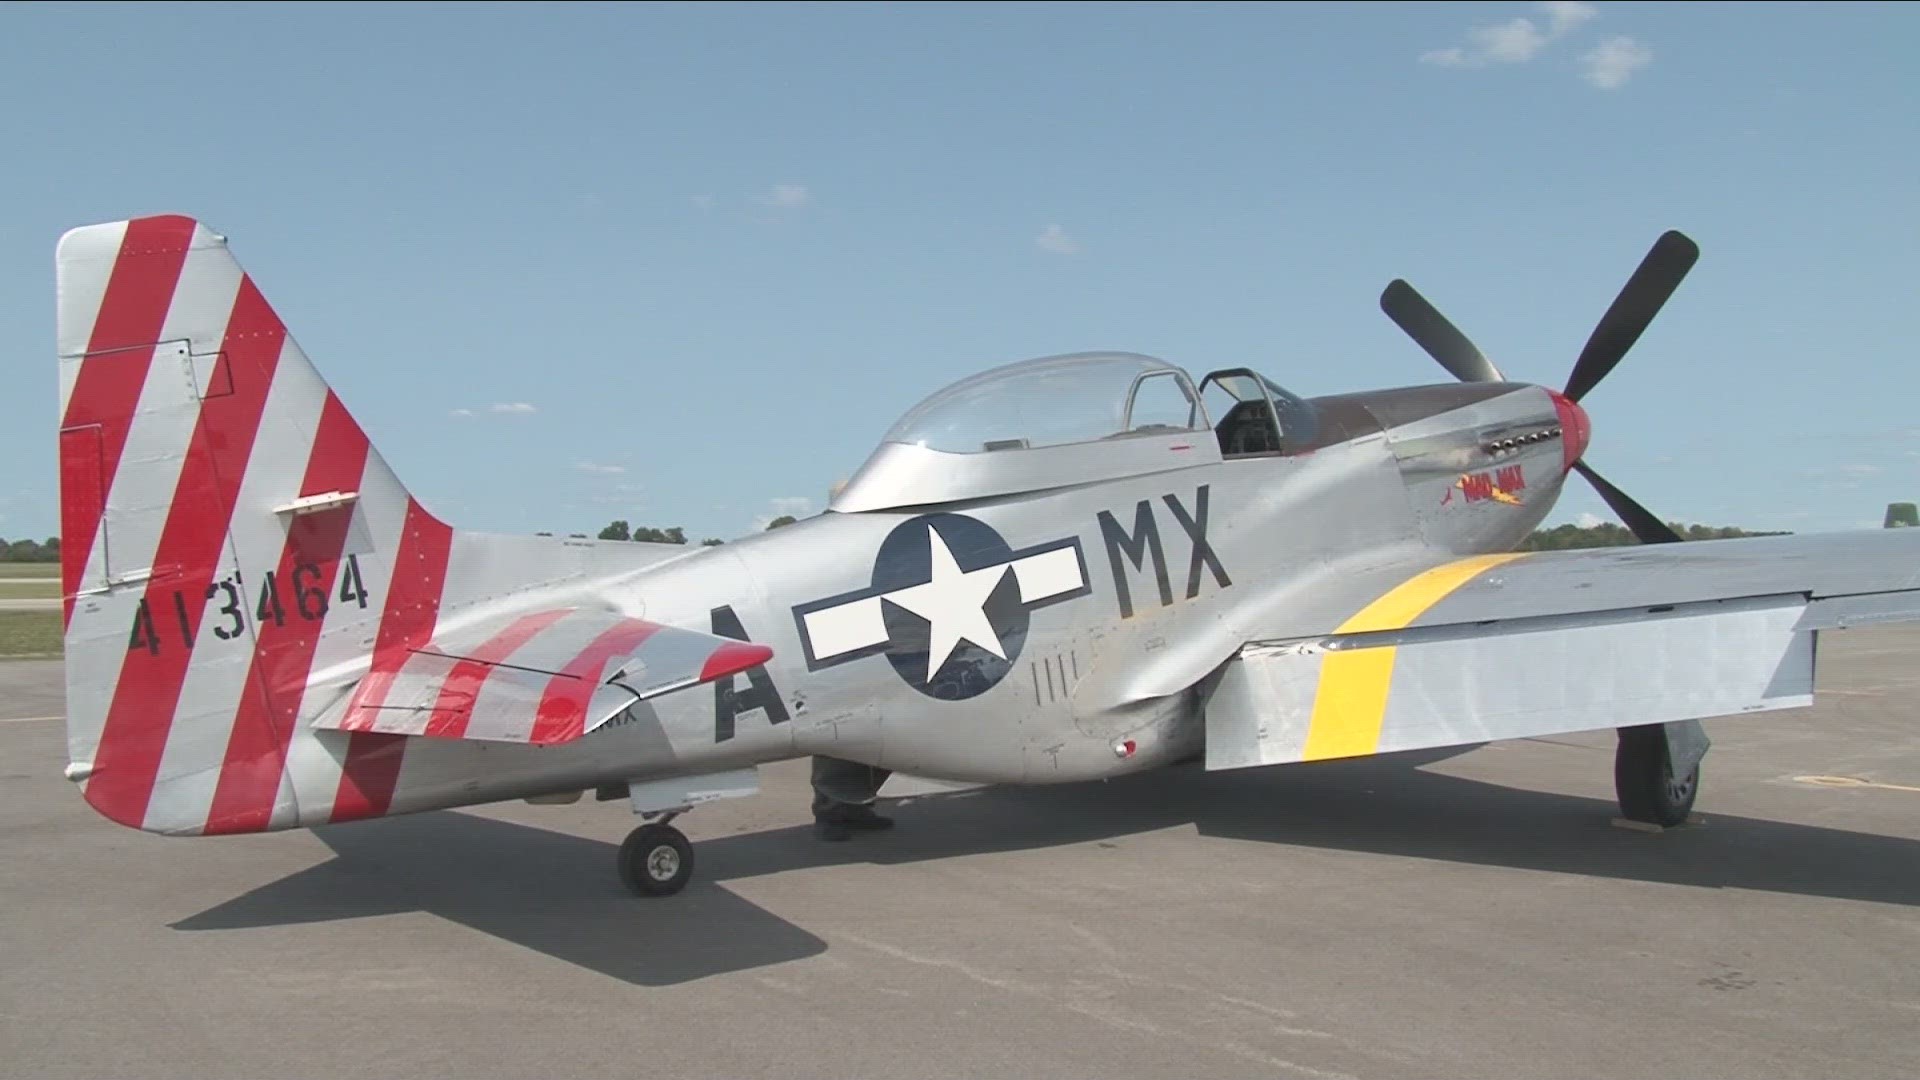 Wings Over Batavia airshow takes place this weekend